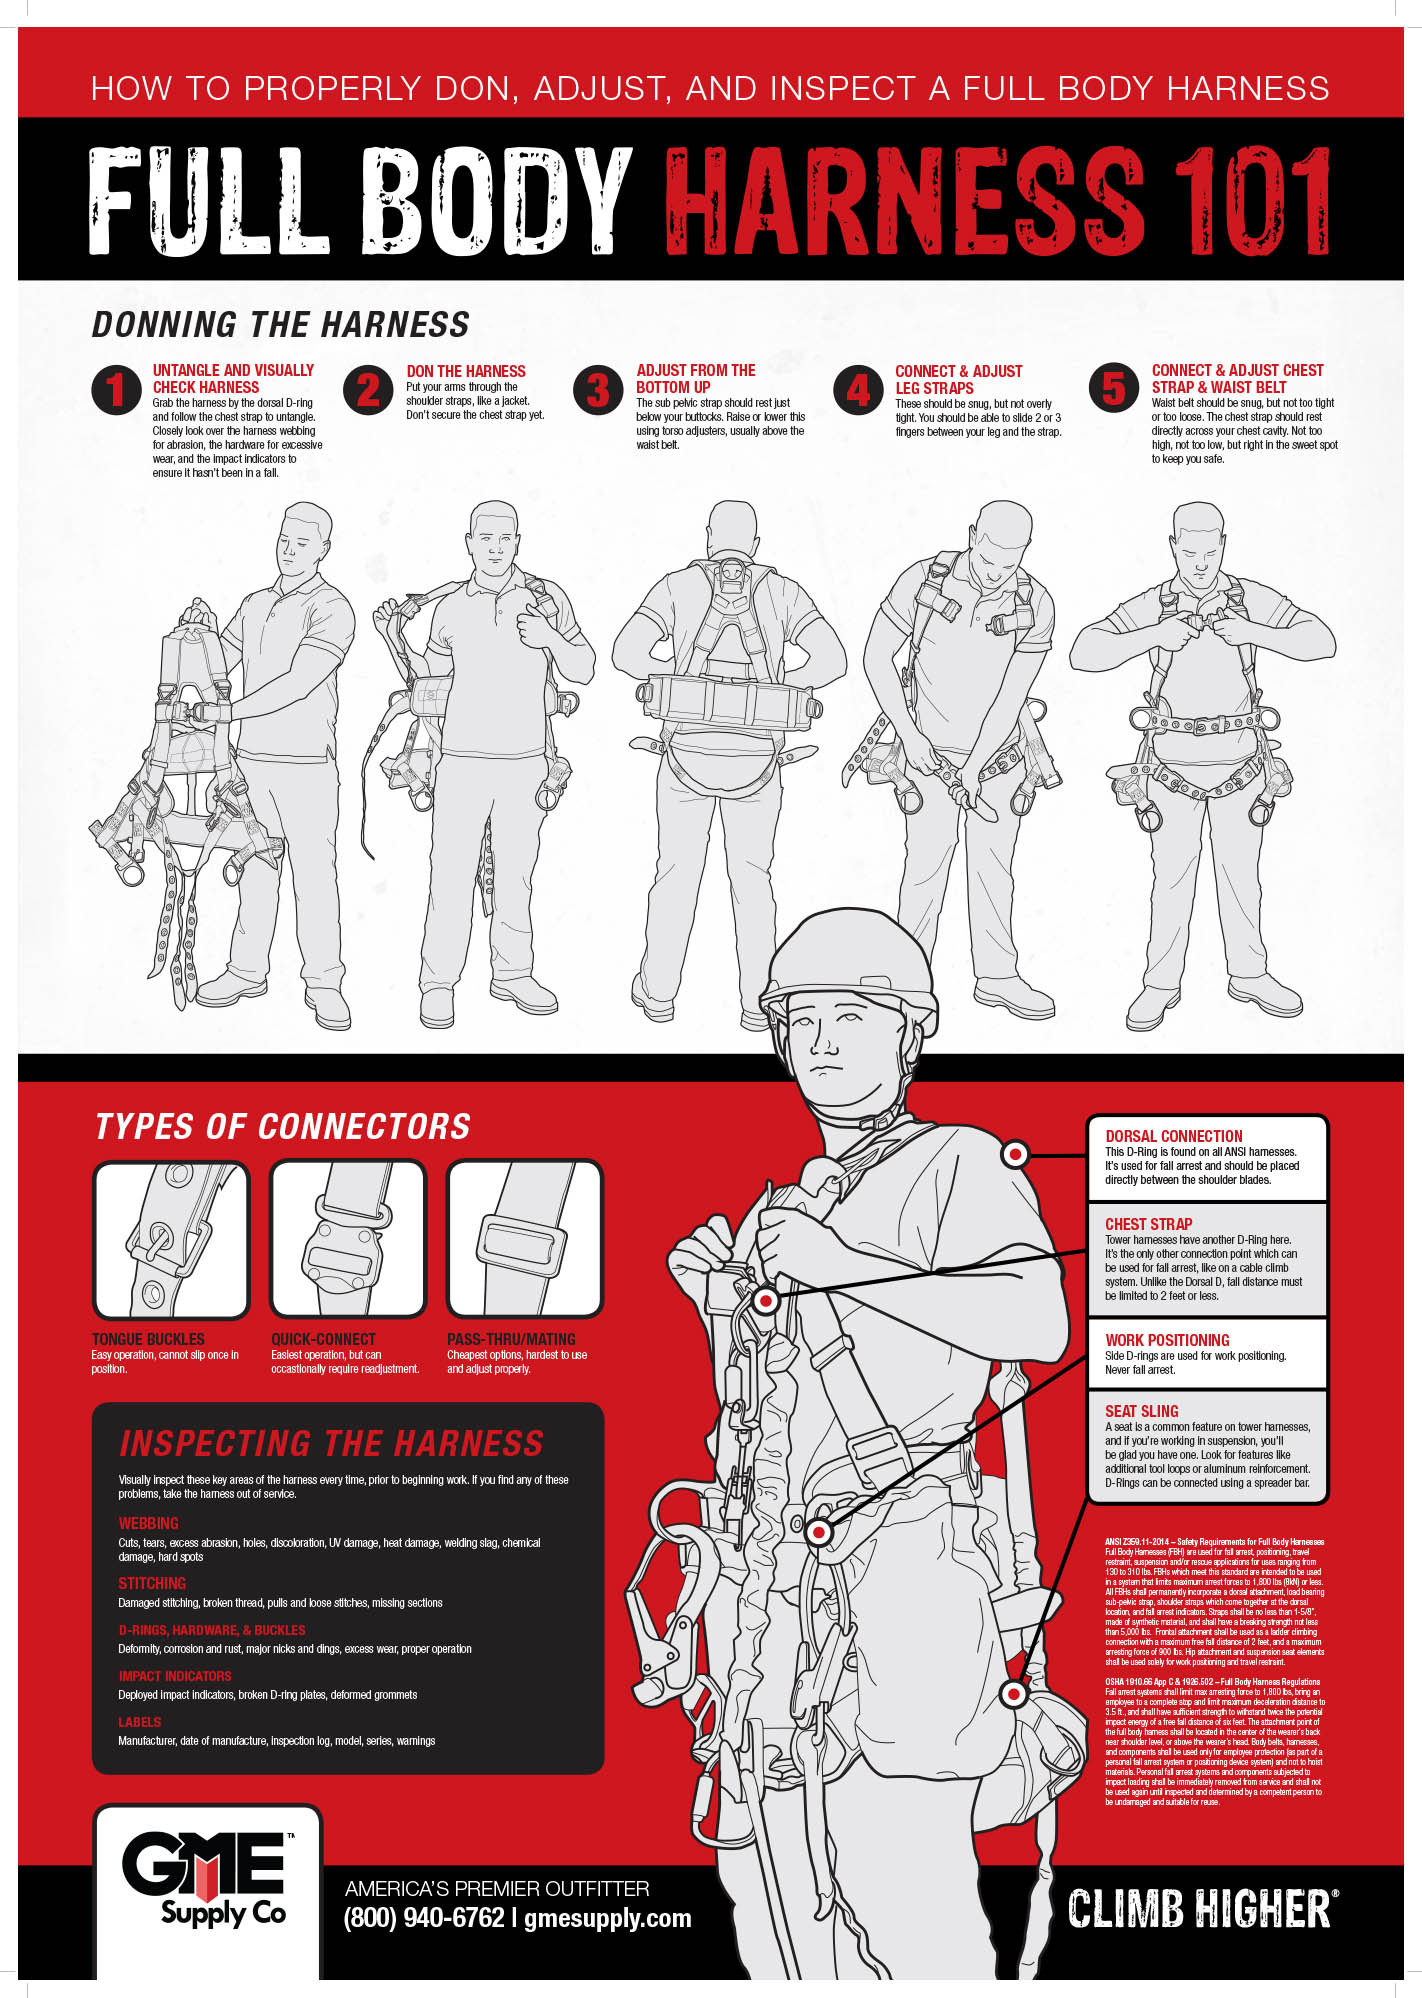 Full Body Harness 101 Safety Poster from GME Supply